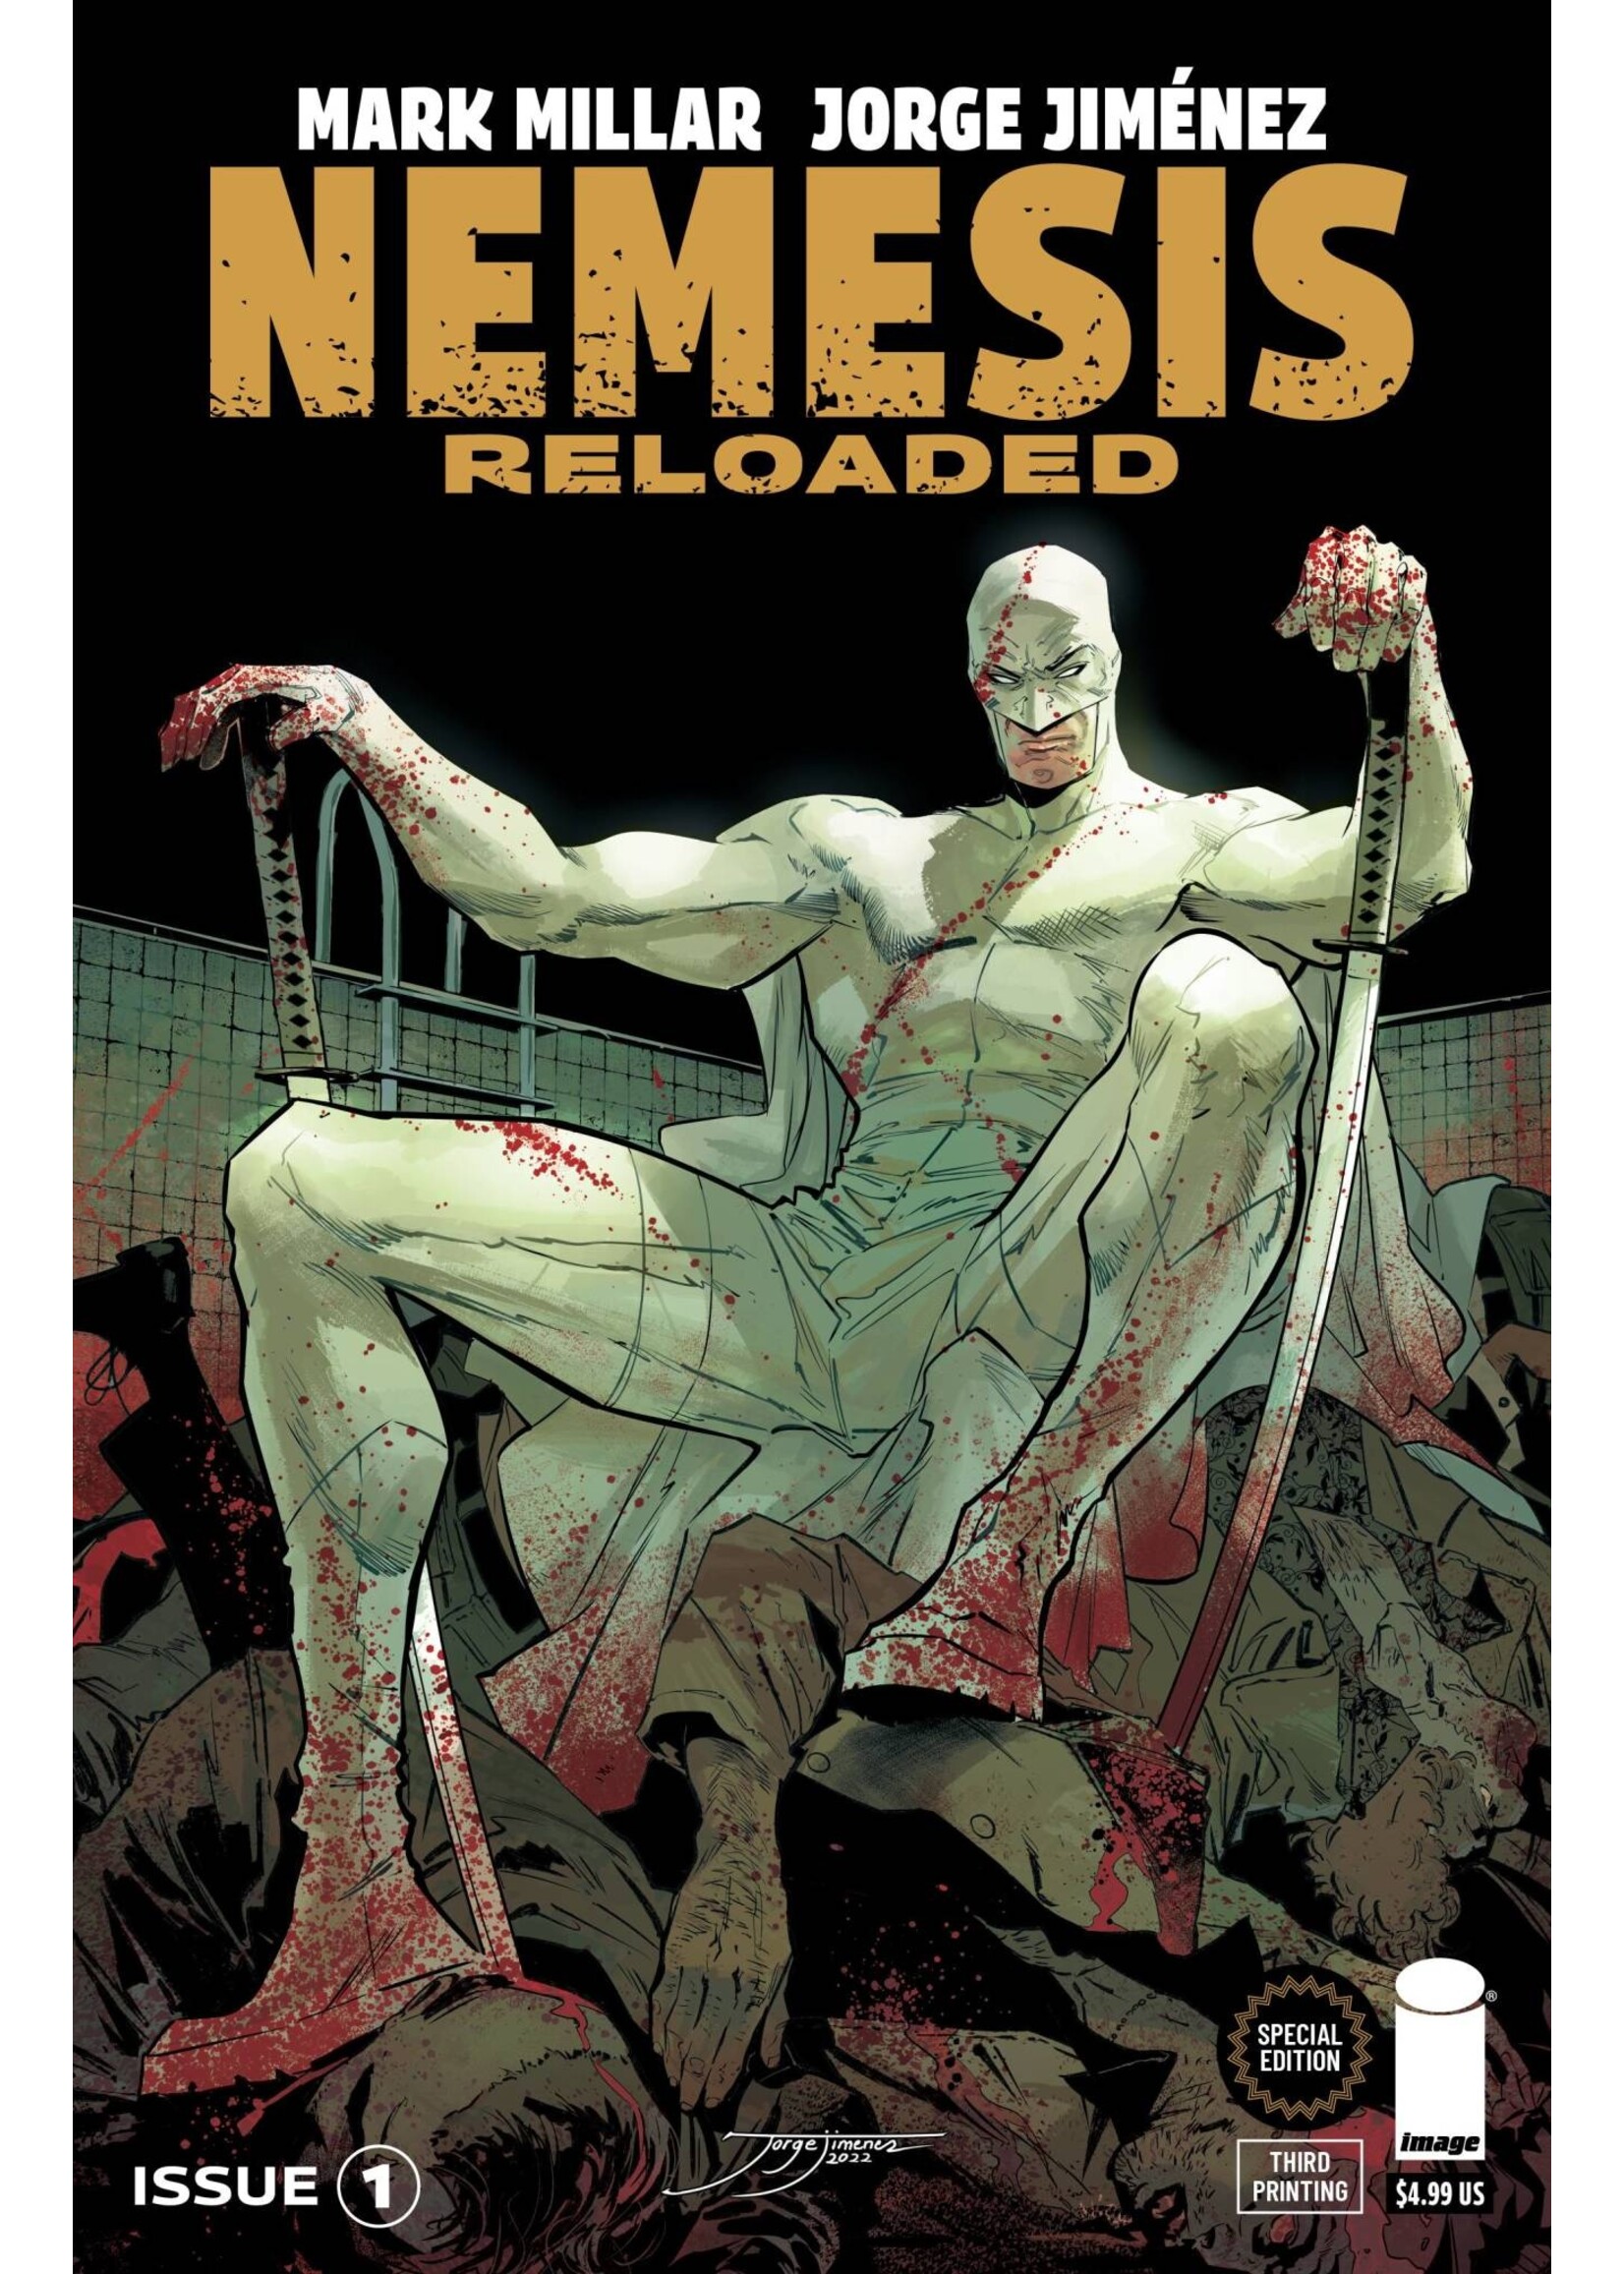 IMAGE COMICS NEMESIS RELOADED complete 5 issues series